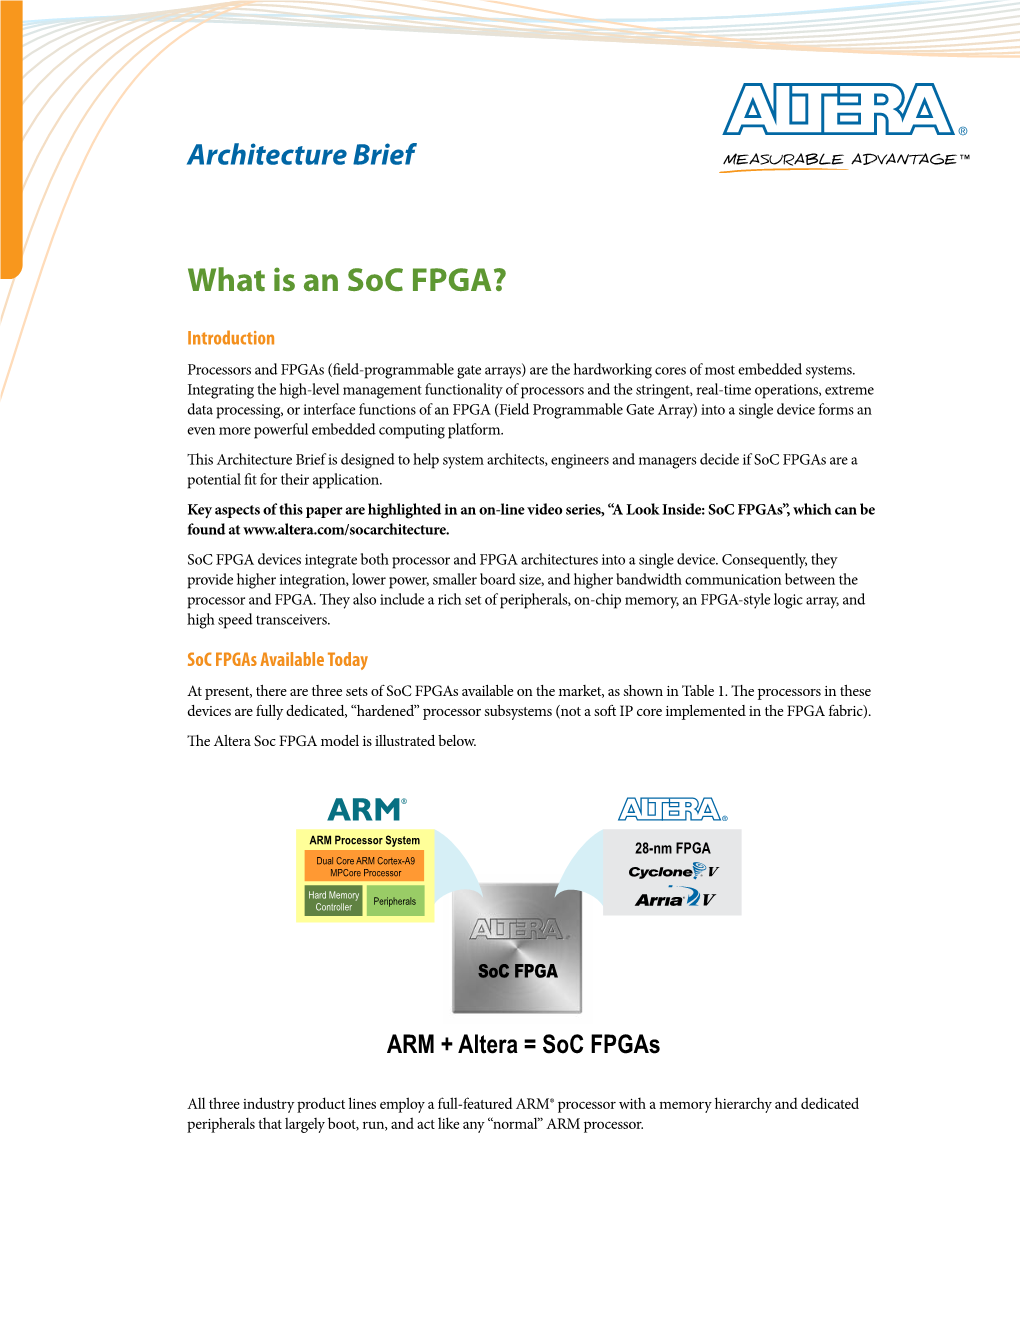 What Is an Soc FPGA? Architecture Brief (PDF)